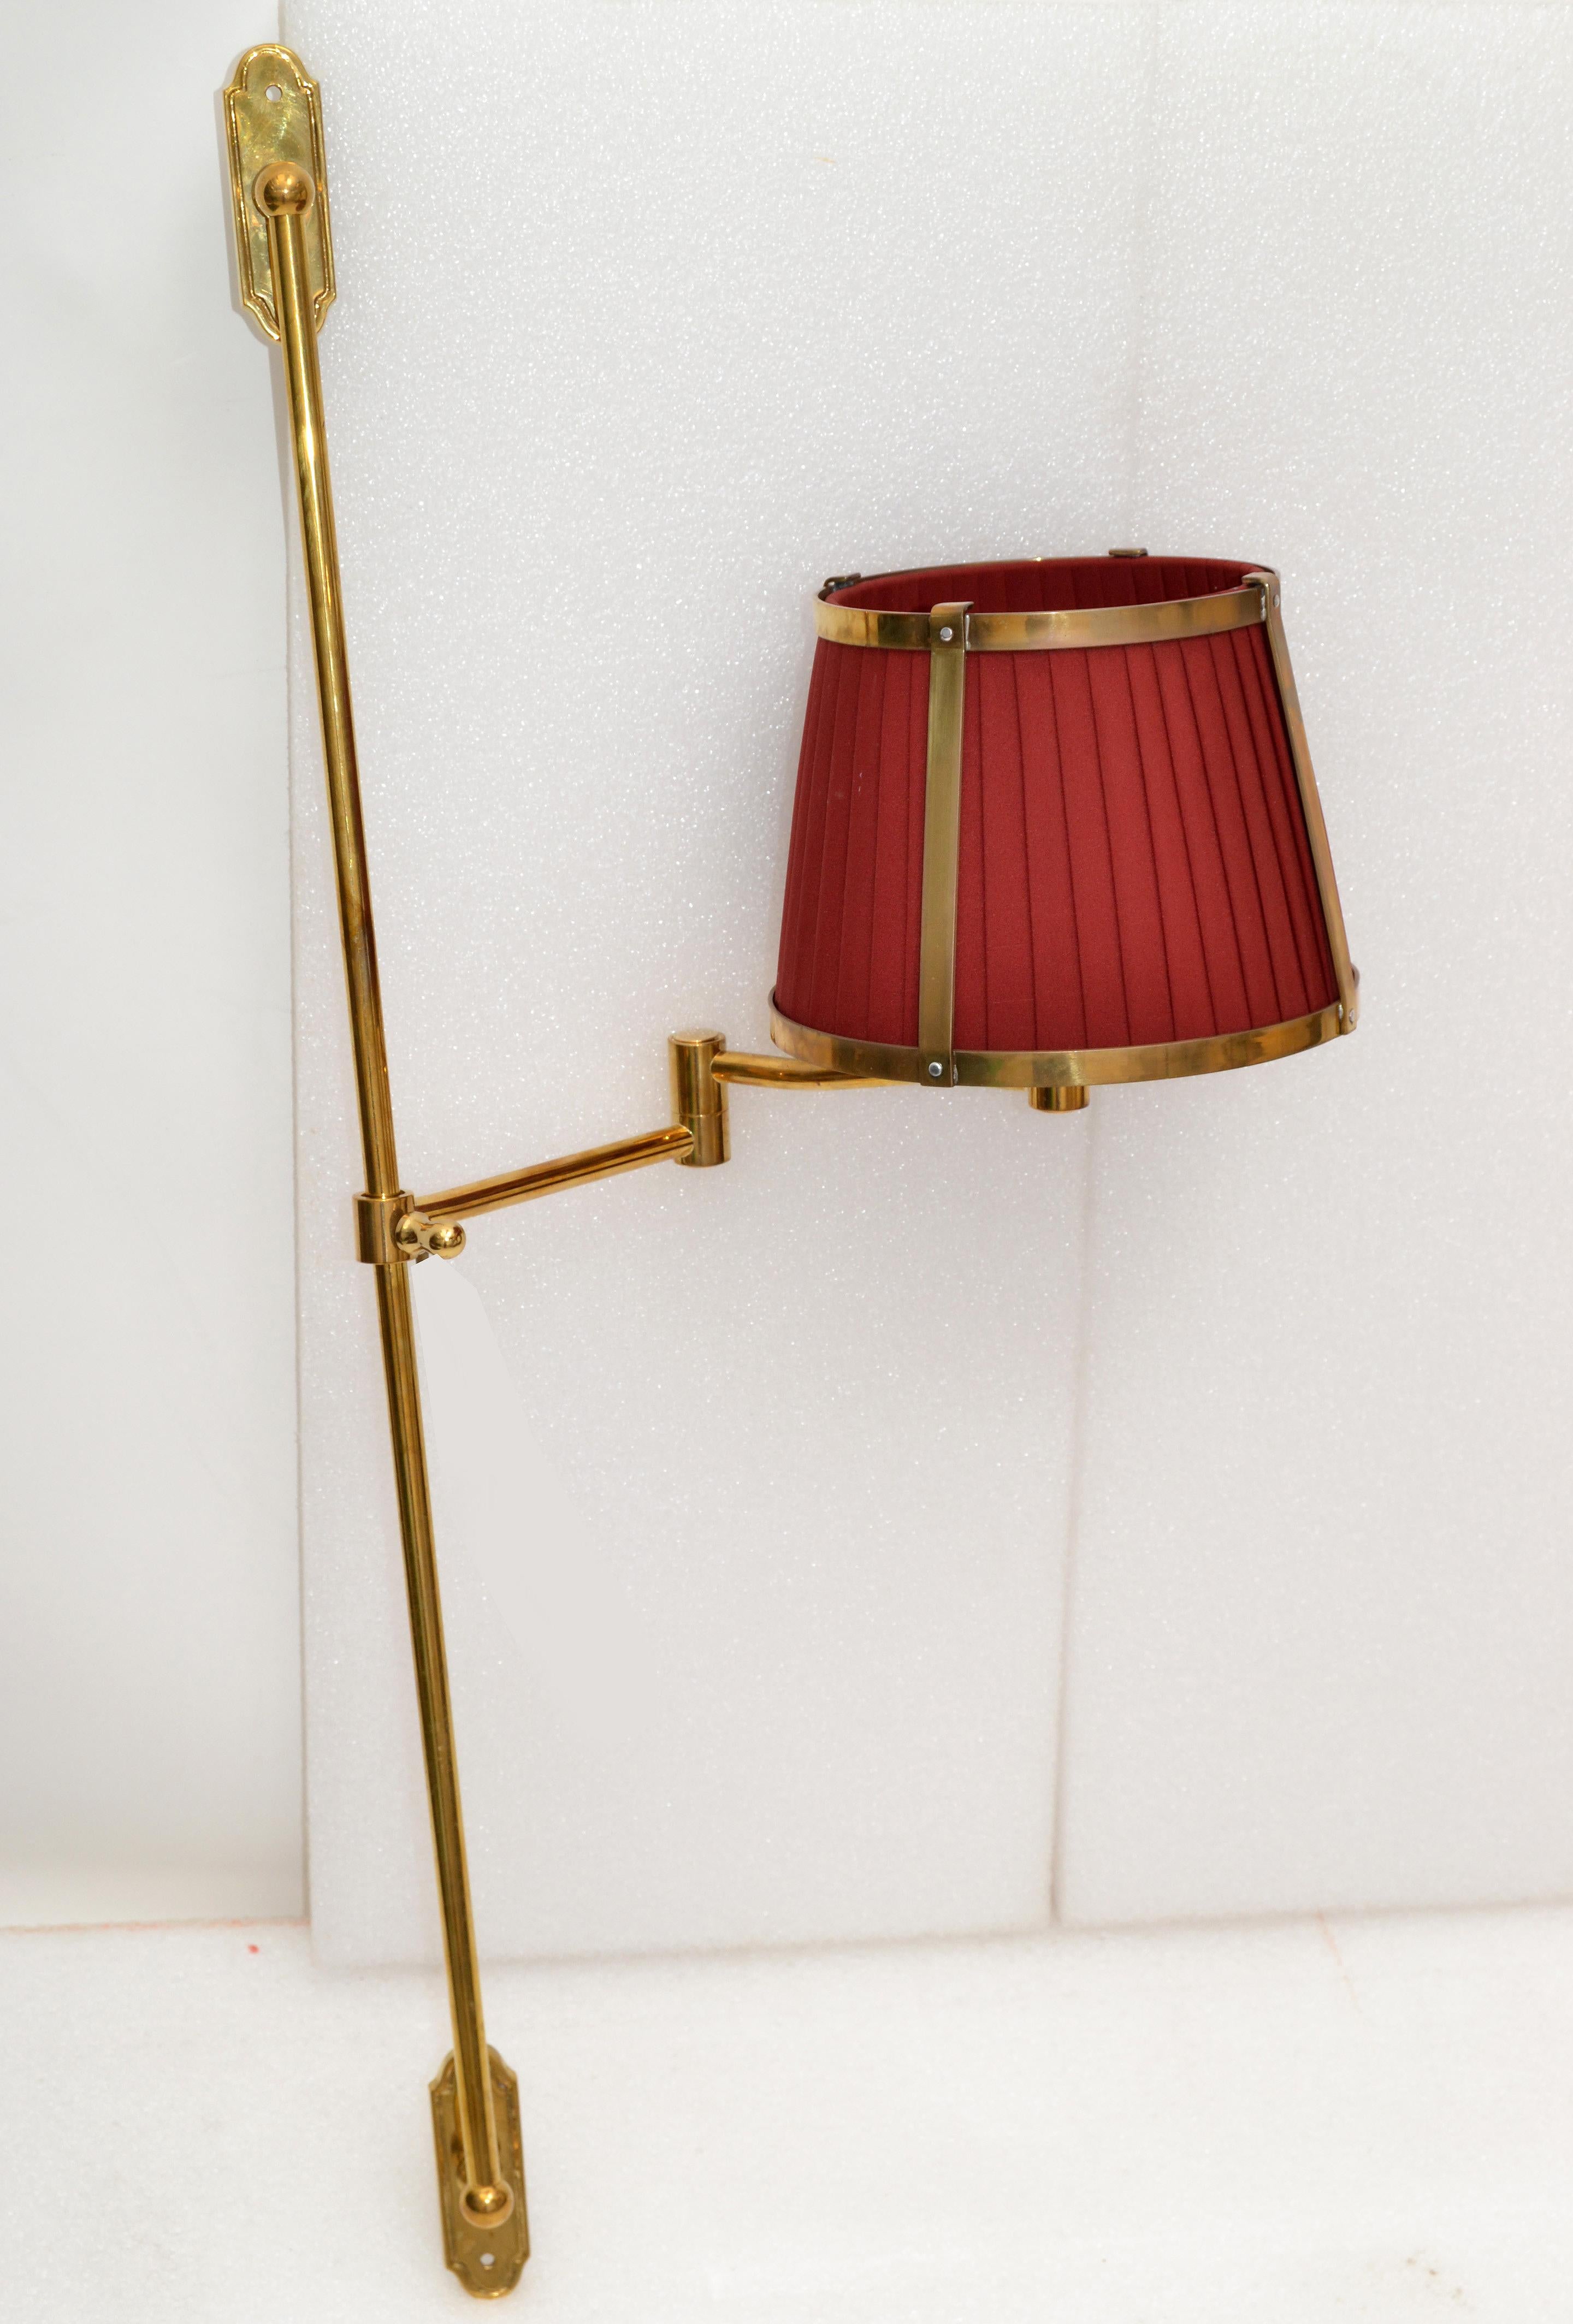 Mid-20th Century Pair Marina Retractable Swing Arm Sconces Original Brass Shades 2 Sets Available